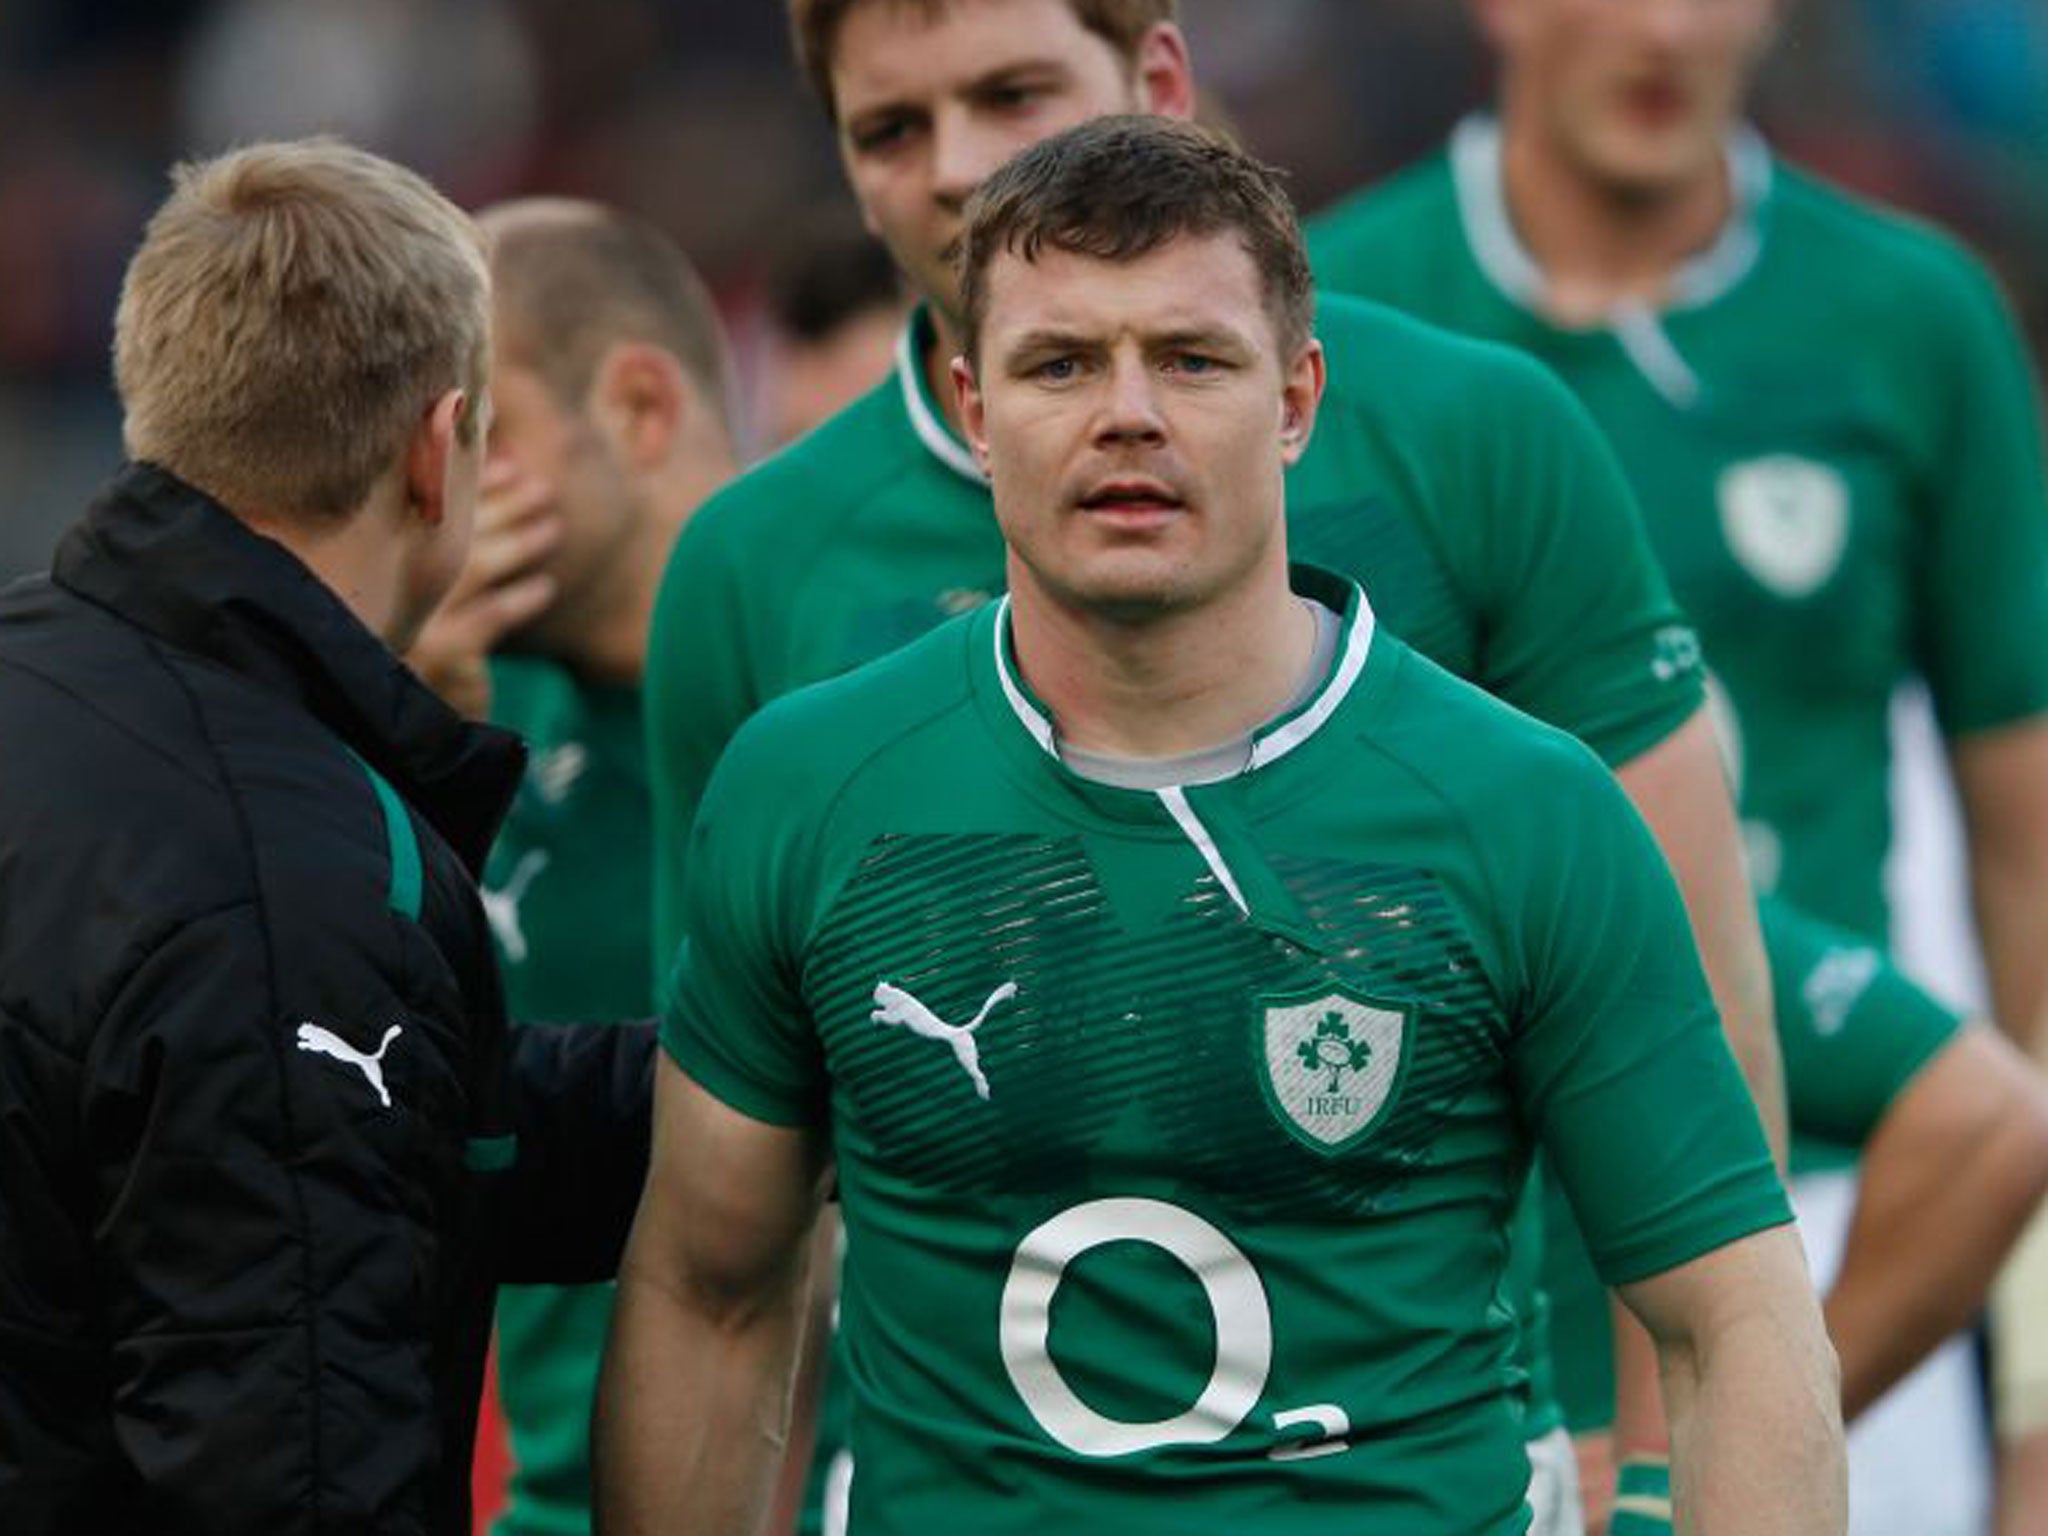 The Leinster centre will miss three crucial games for his club